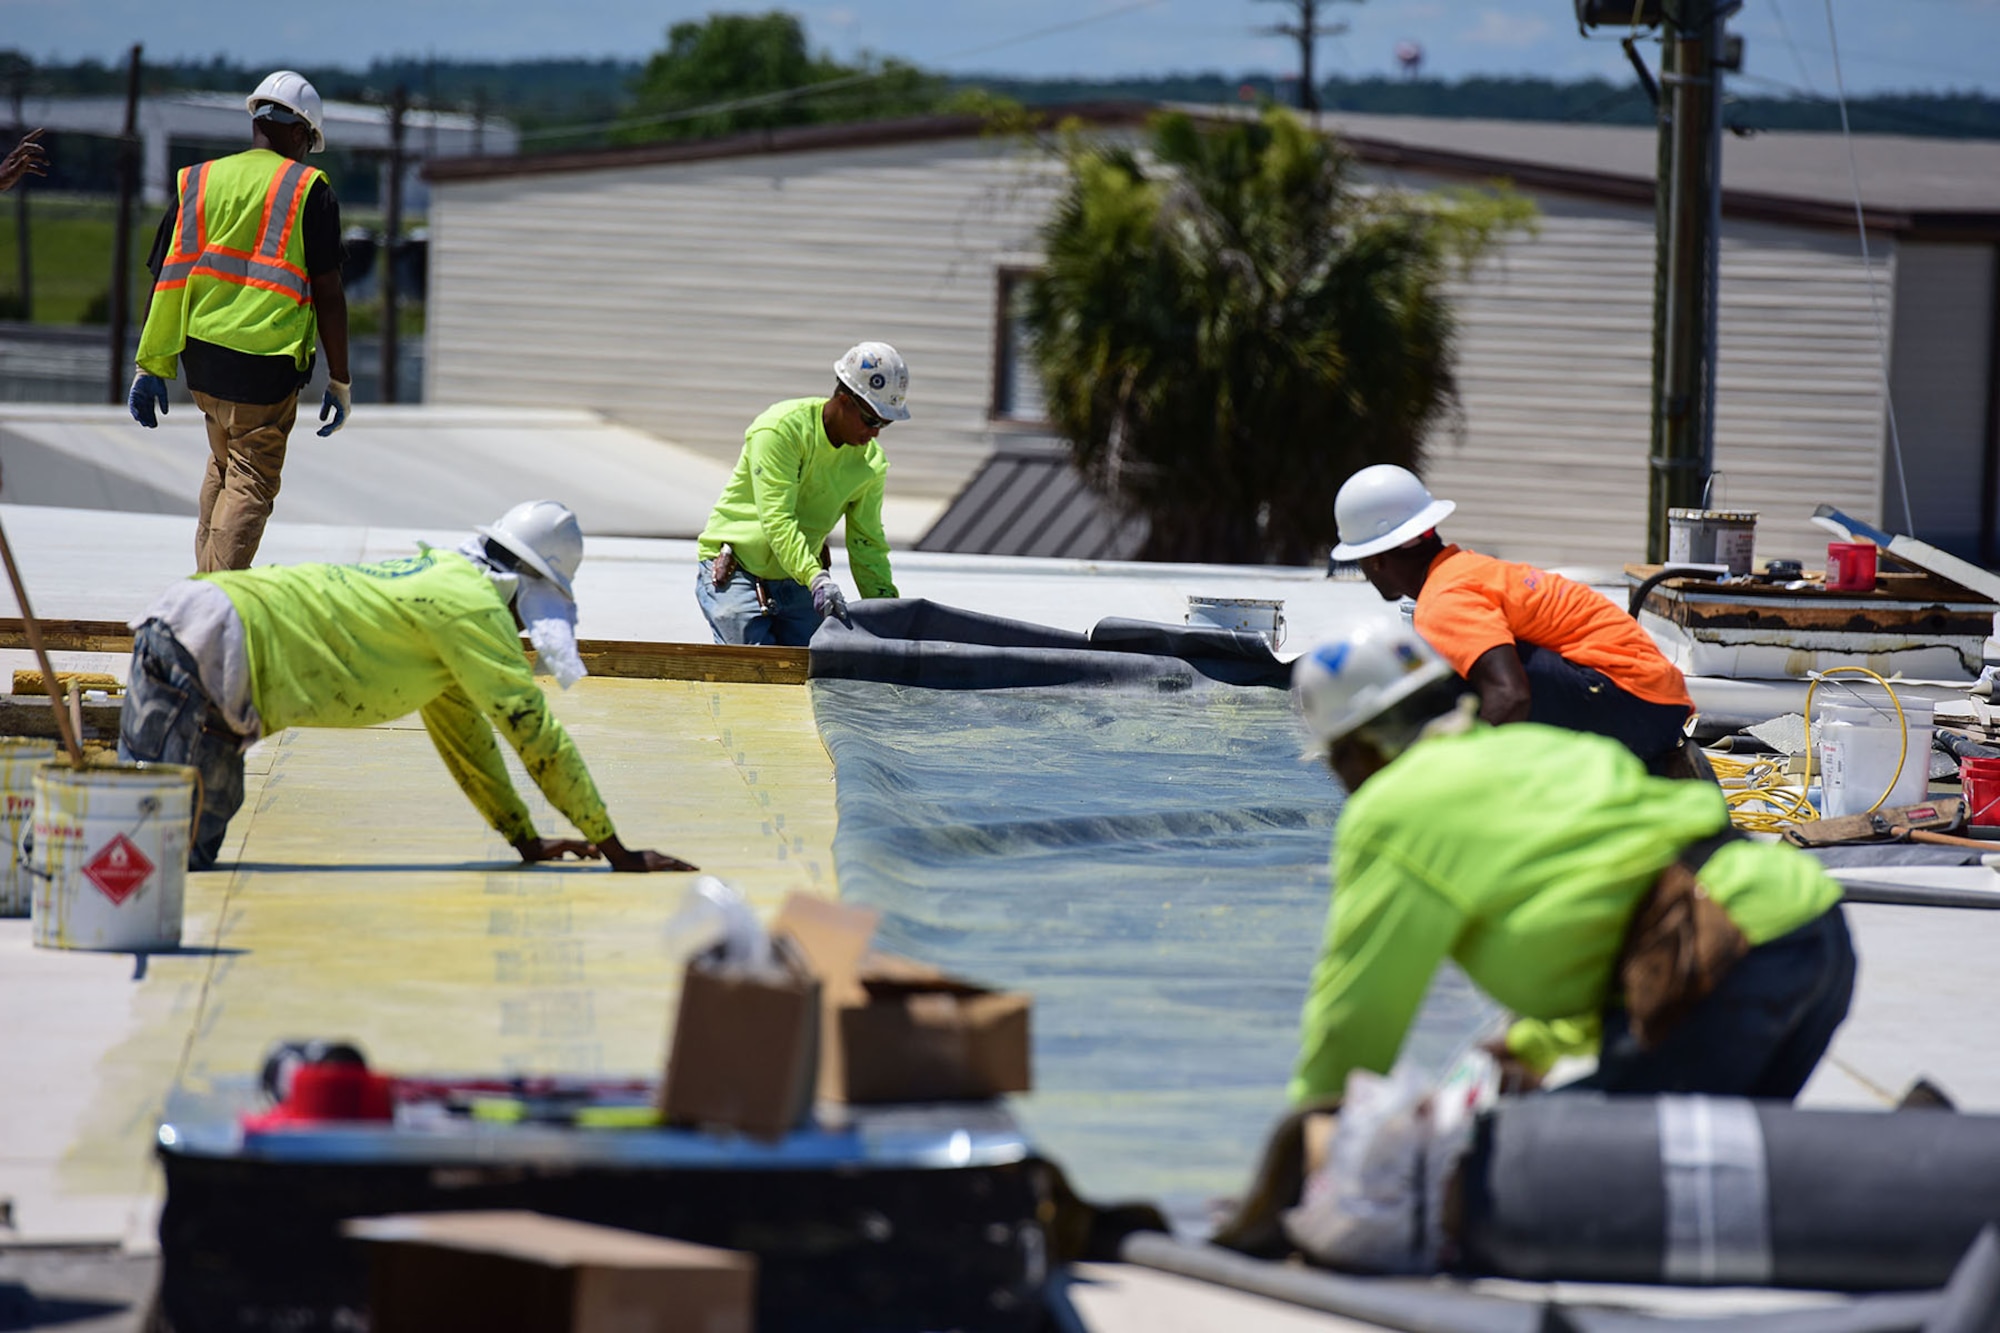 Civilian contractors work on renovation projects at various locations around McEntire Joint National Guard Base, S.C., June 8, 2017. Select buildings and runway sections are undergoing renovations designed and contracted by the 169th Civil Engineer Squadron which will aid training missions of Swamp Fox Airmen. (U.S. Air National Guard photo by Senior Airman Megan Floyd)